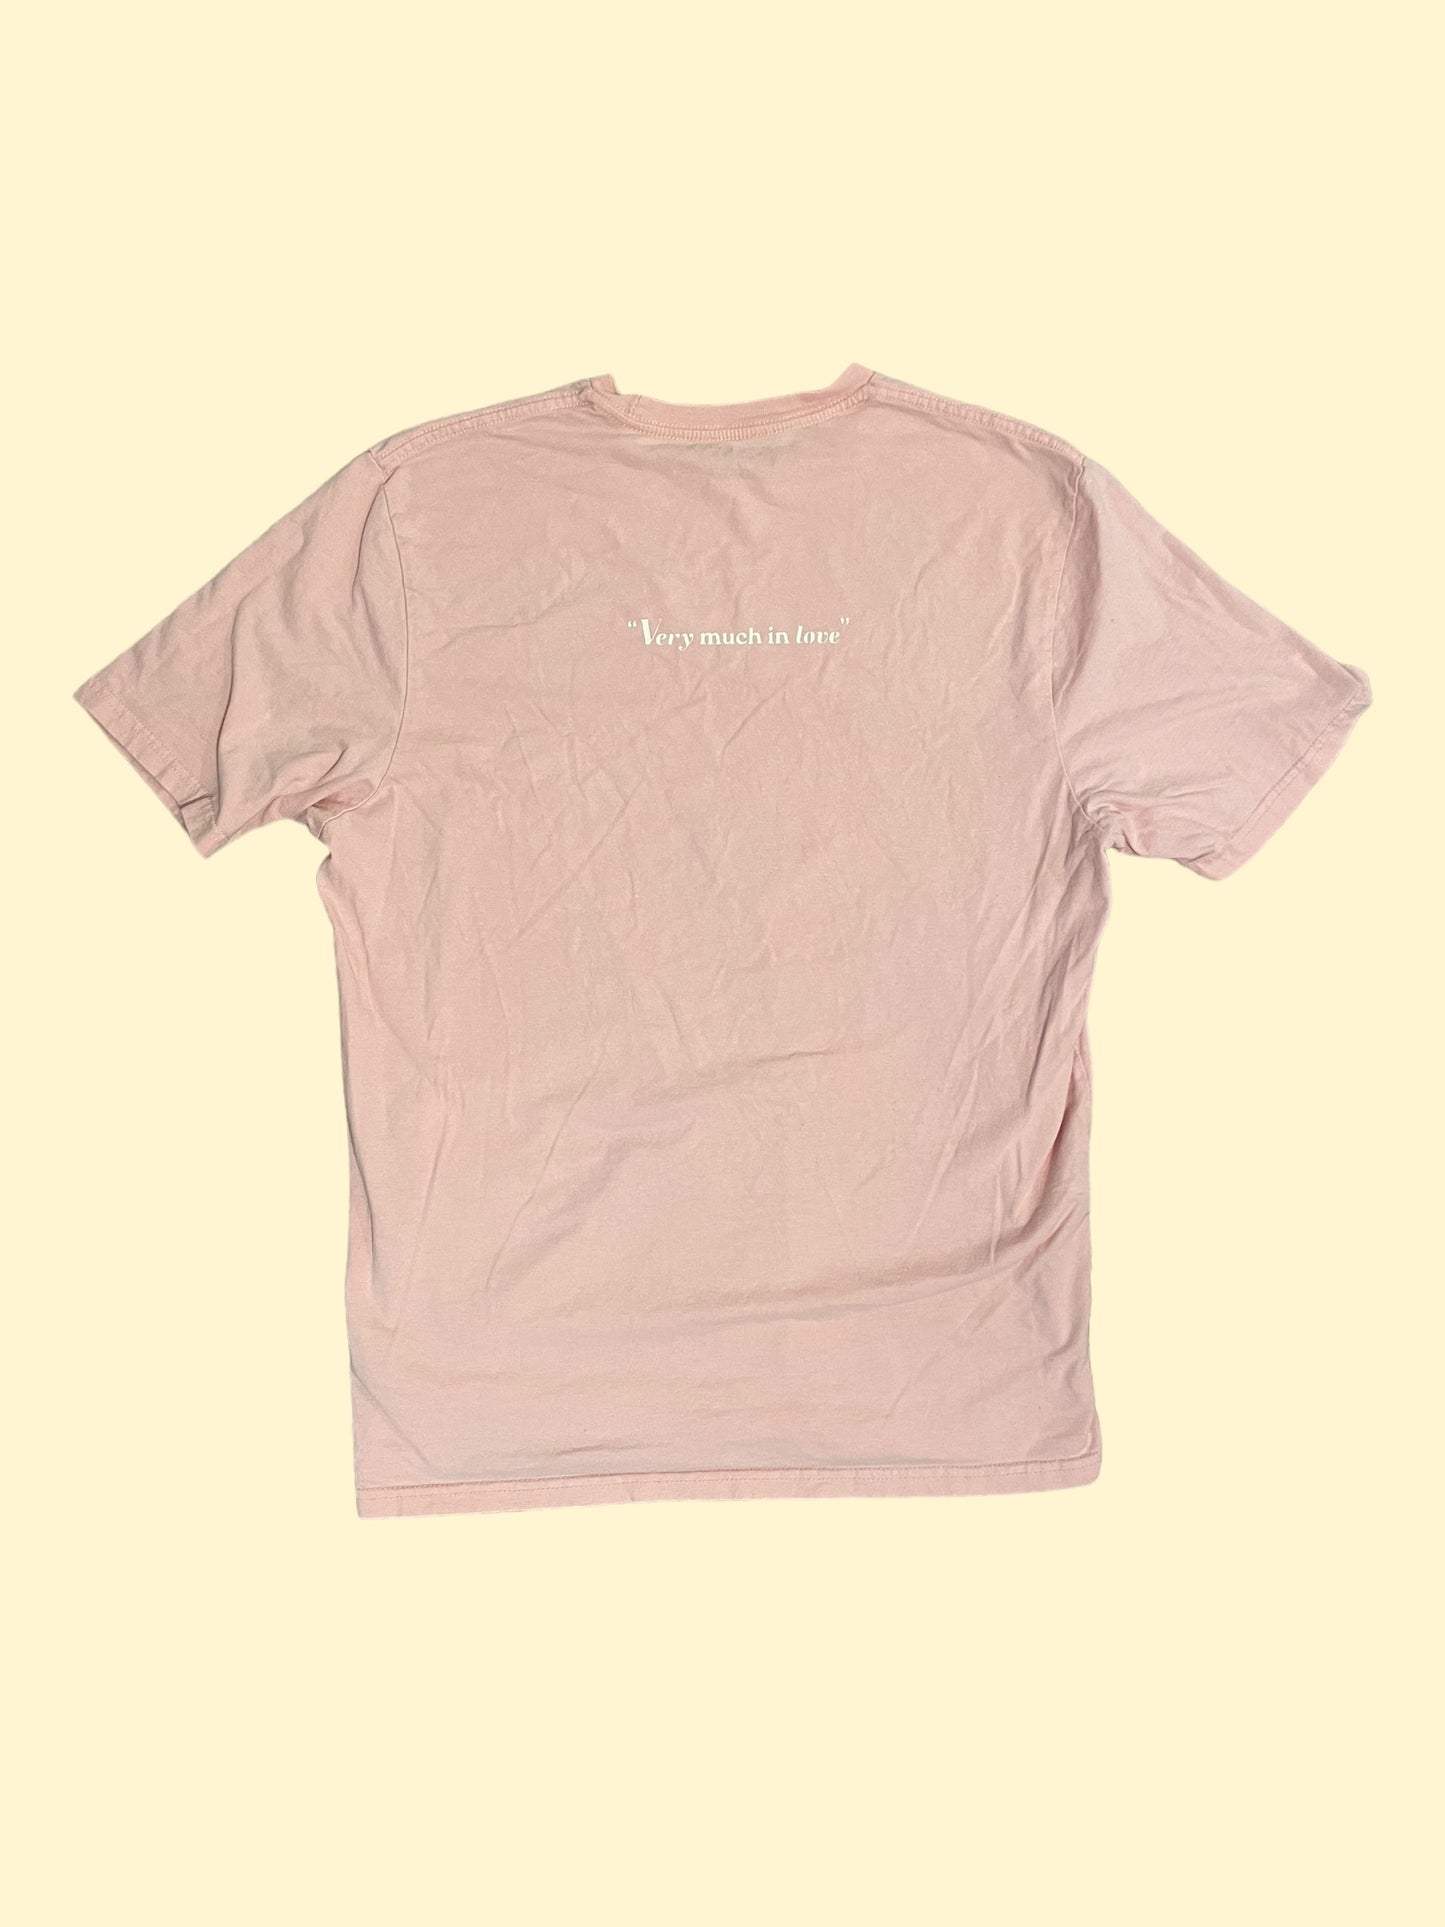 "Very Much In Love" Baby Pink Tee - Size M